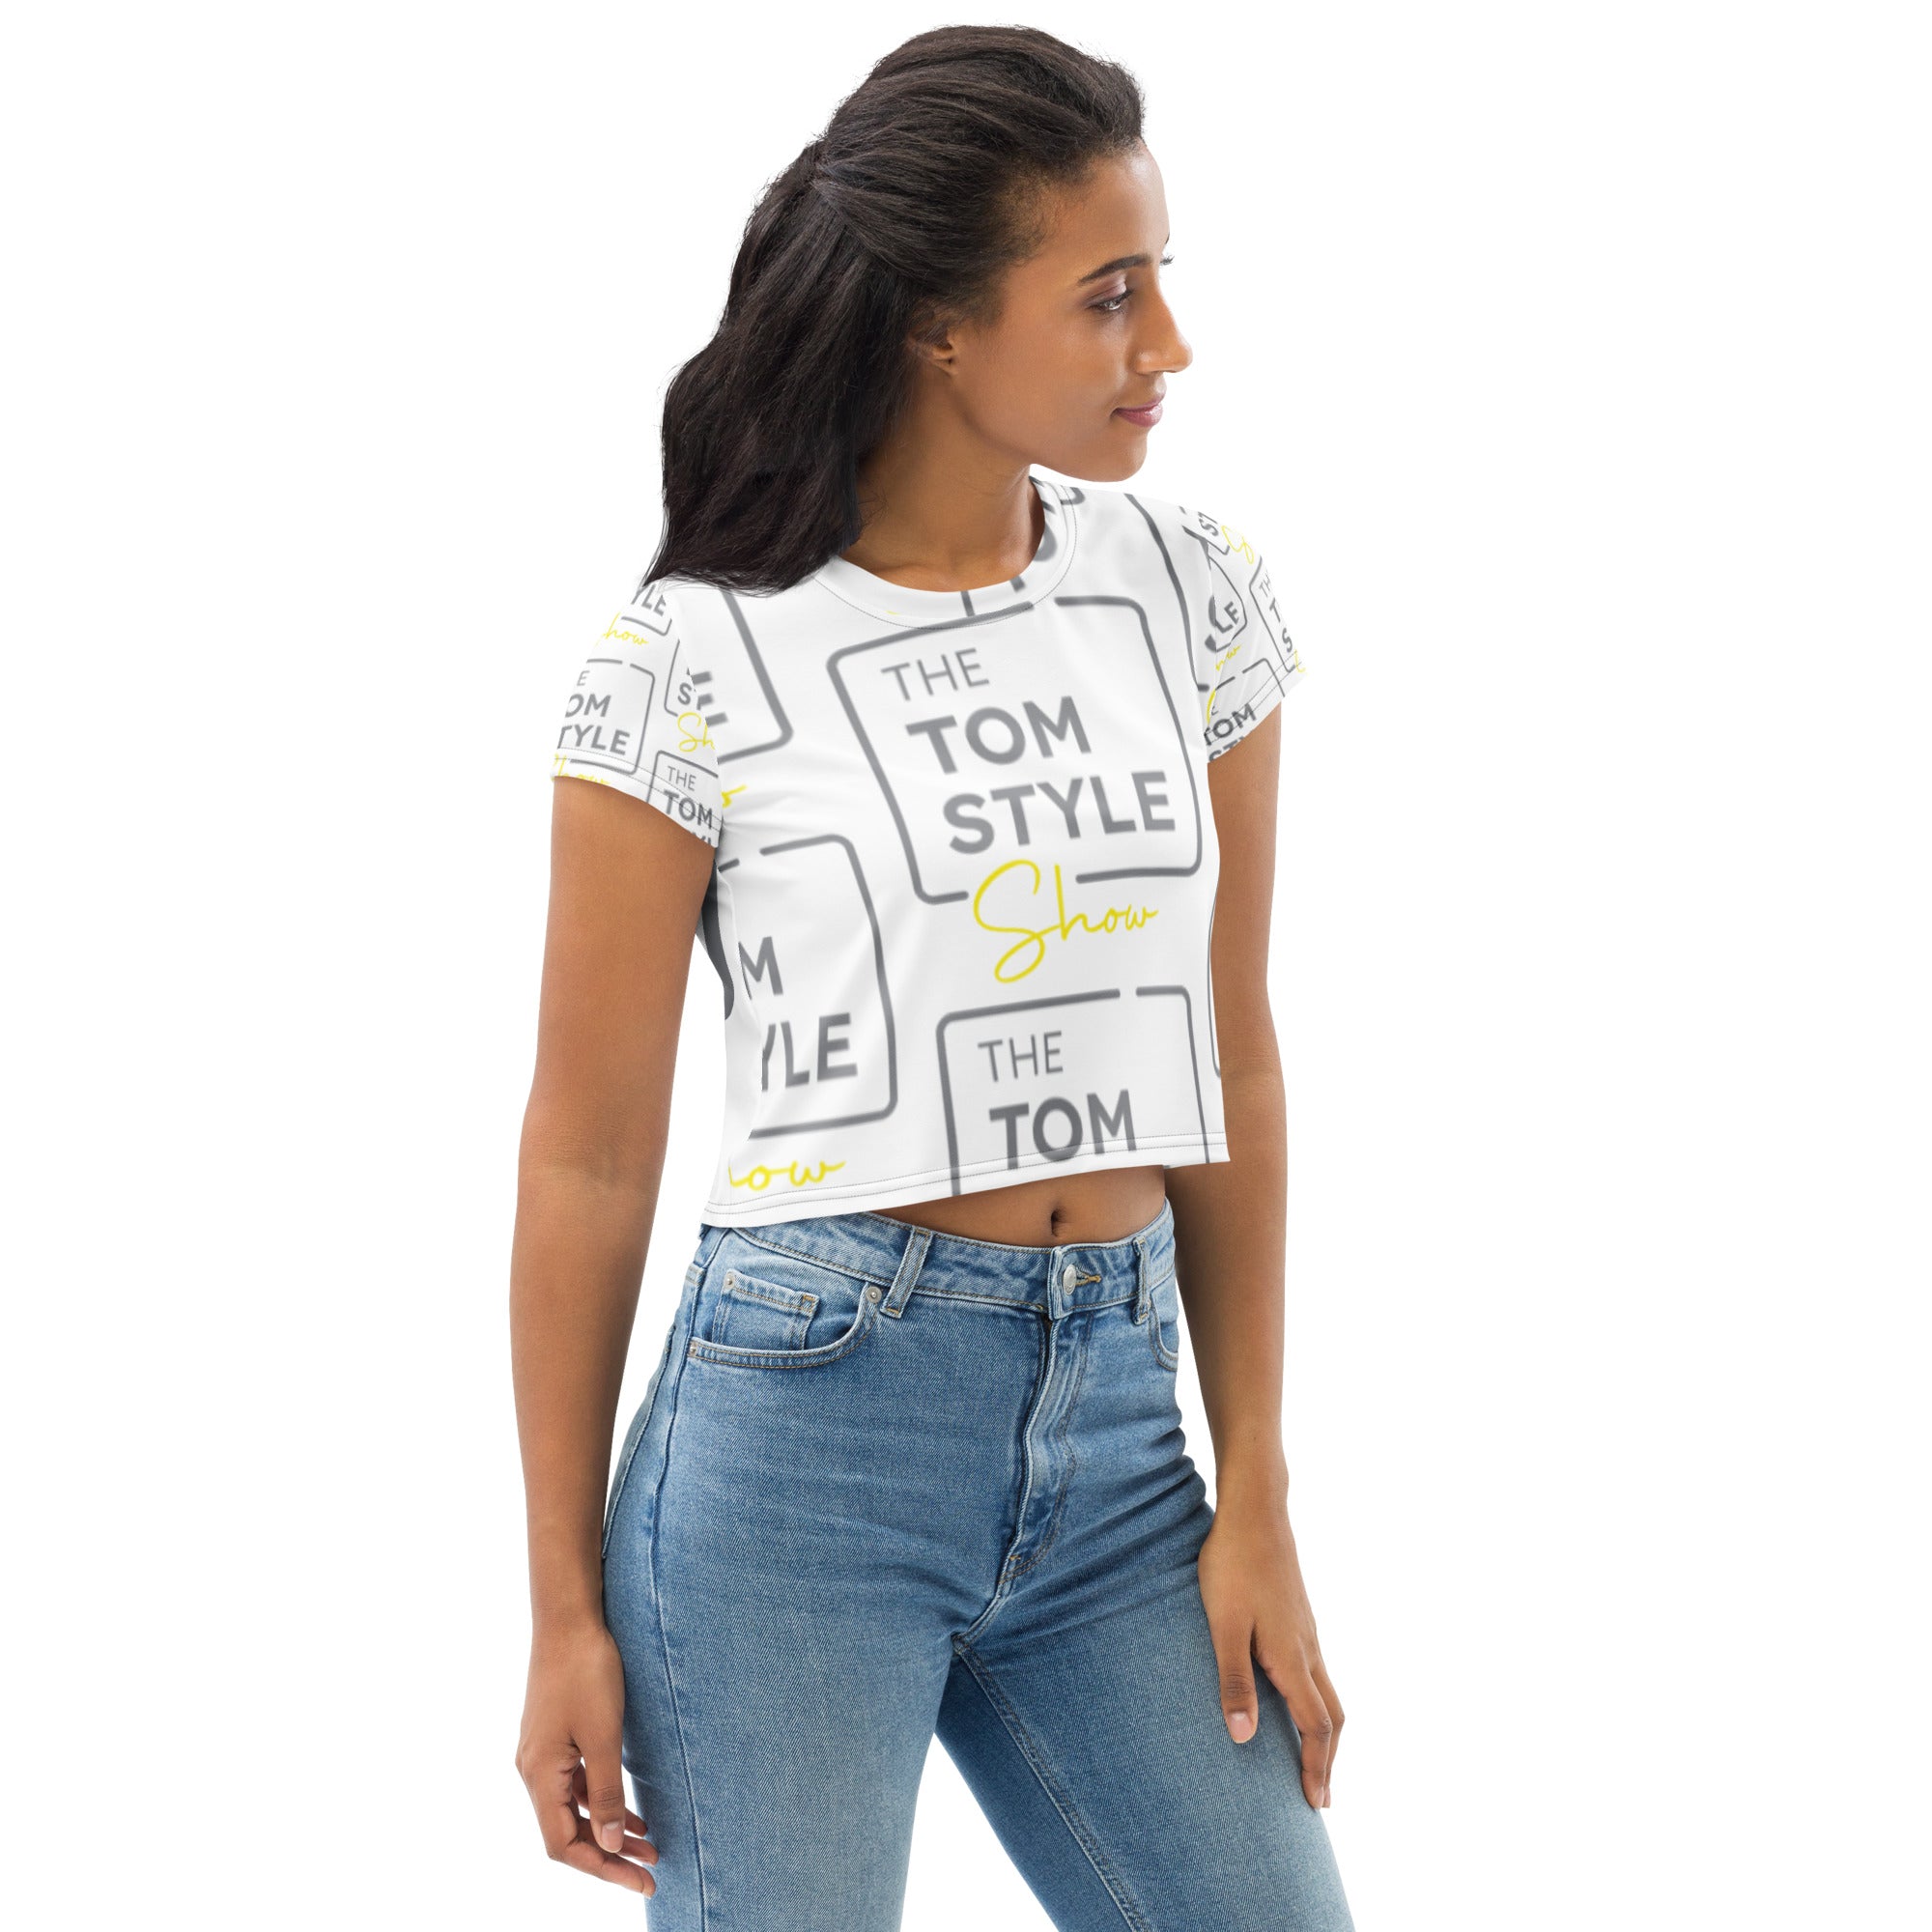 Women's All-Over Print Crop Tee - Tom Style Show